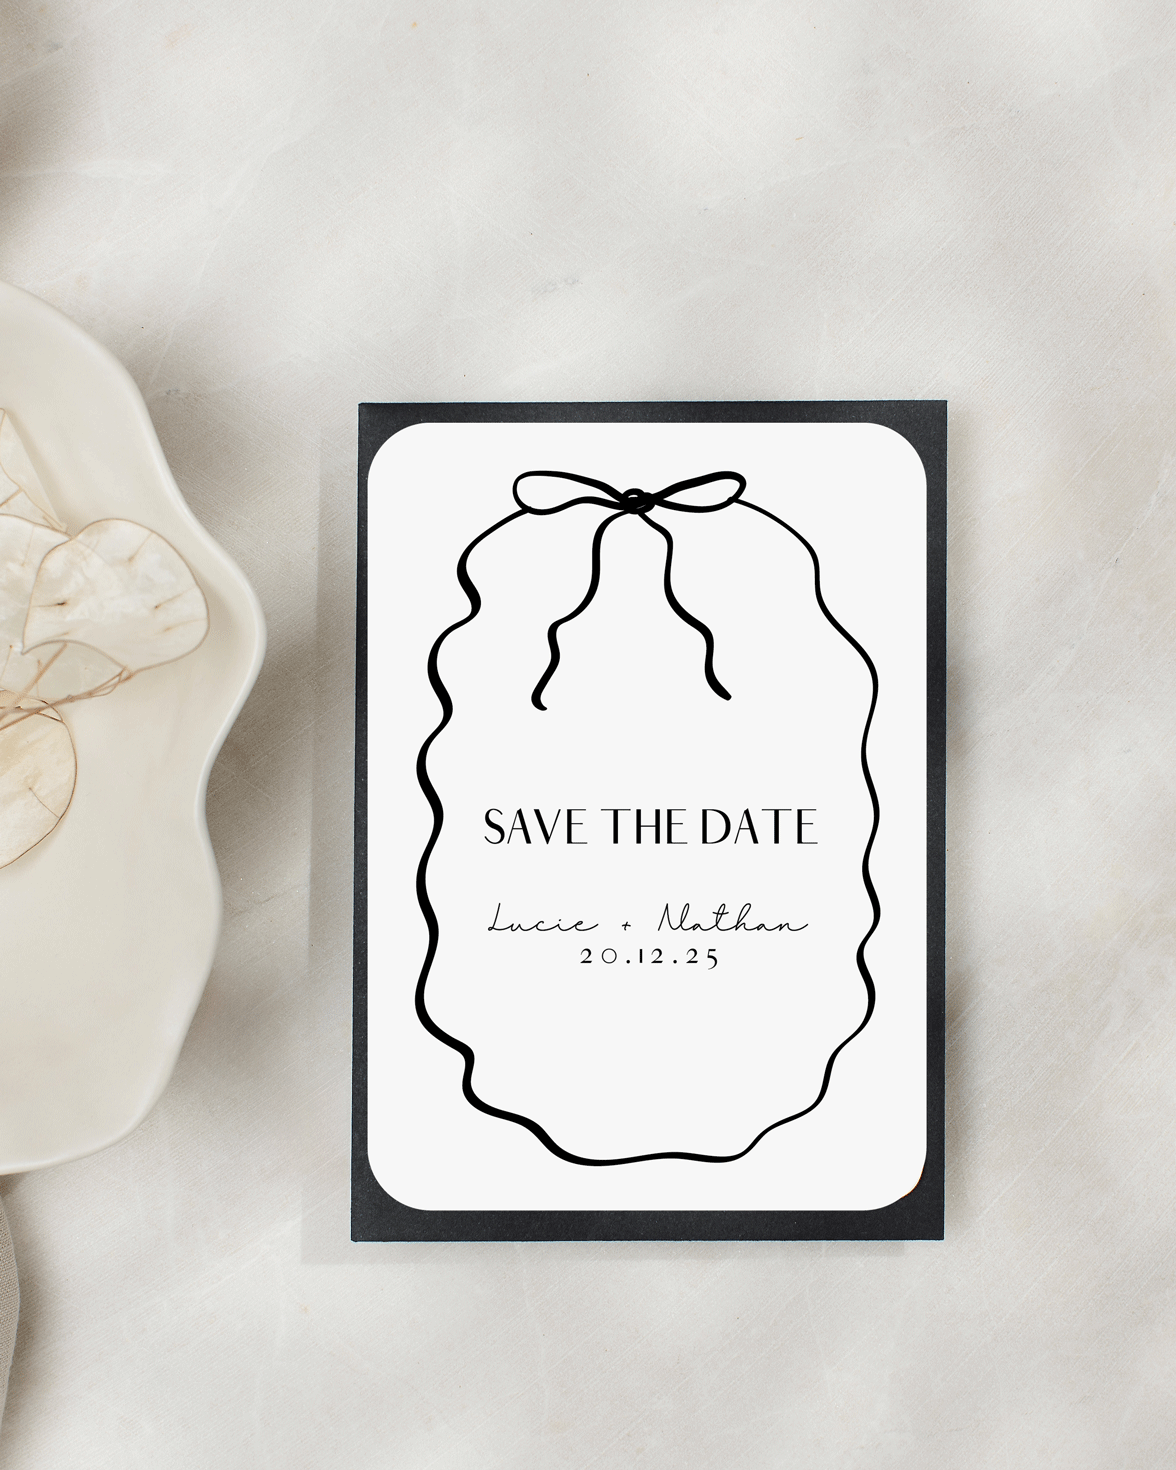 White and black save the date with hand drawn squiggly line border and bow